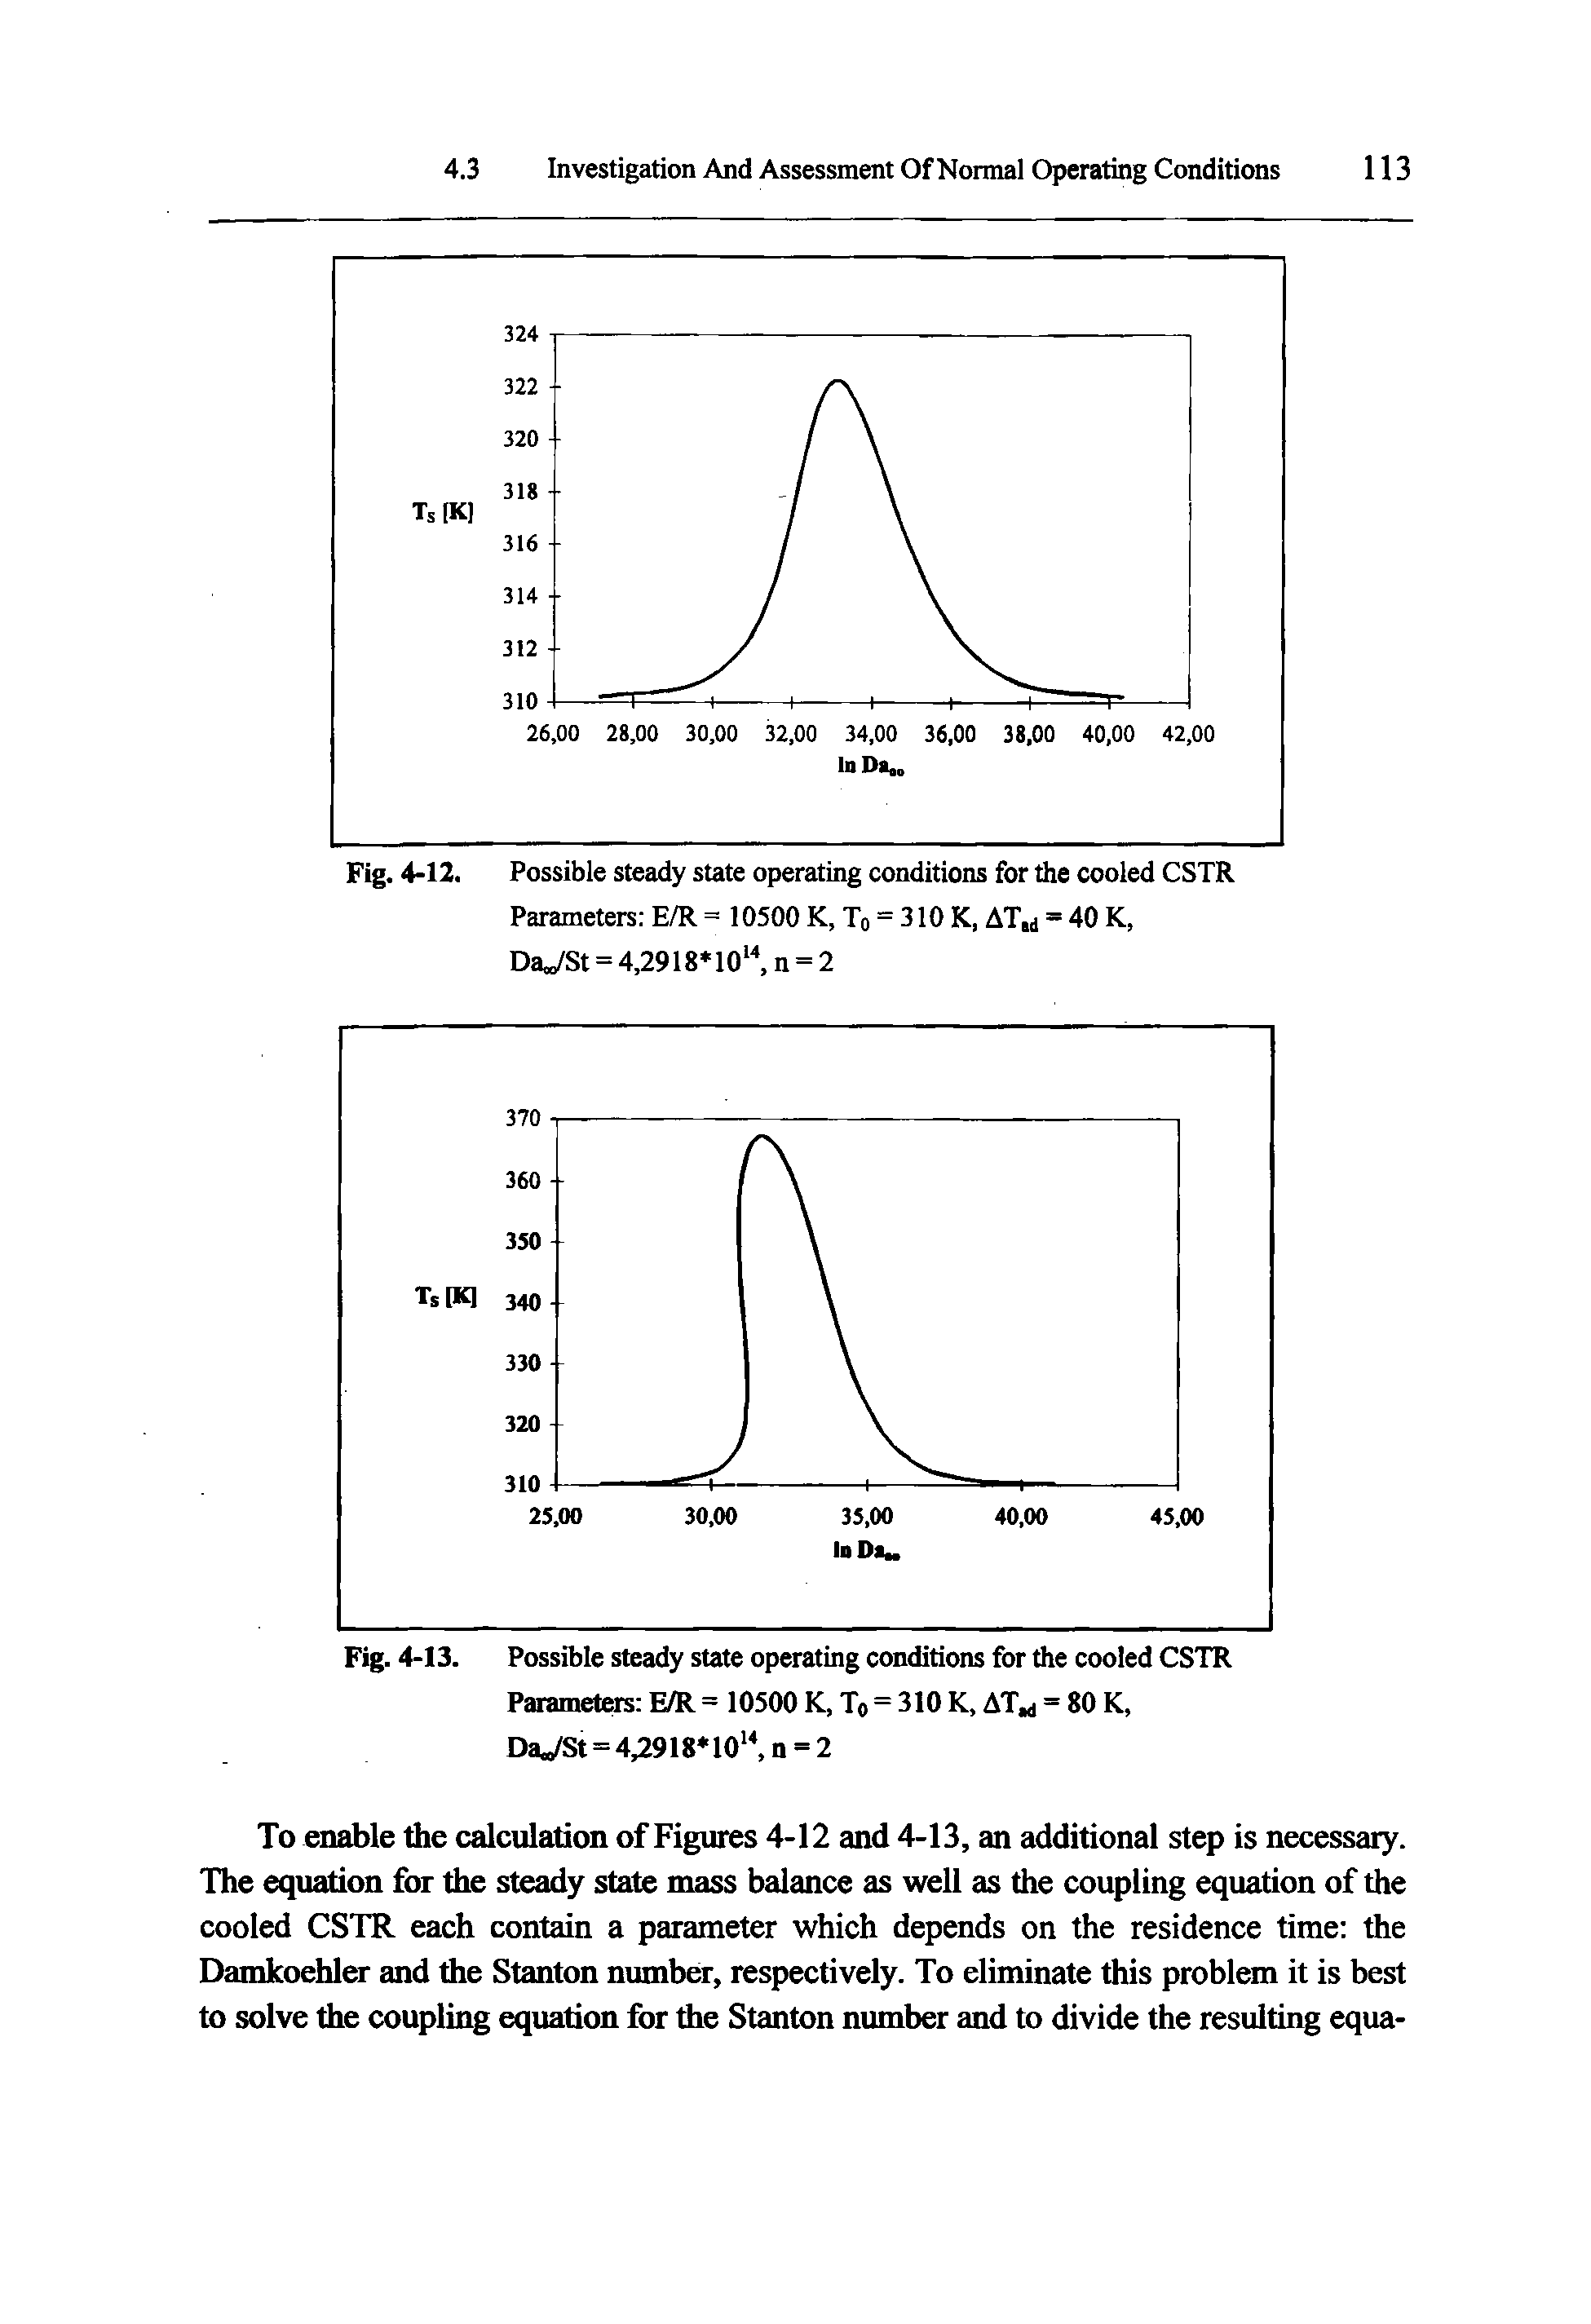 Fig. 4-12. Possible steady state operating conditions for the cooled CSTR Parameters E/R = 10500 K, To = 310 K, AT,j = 40 K,...